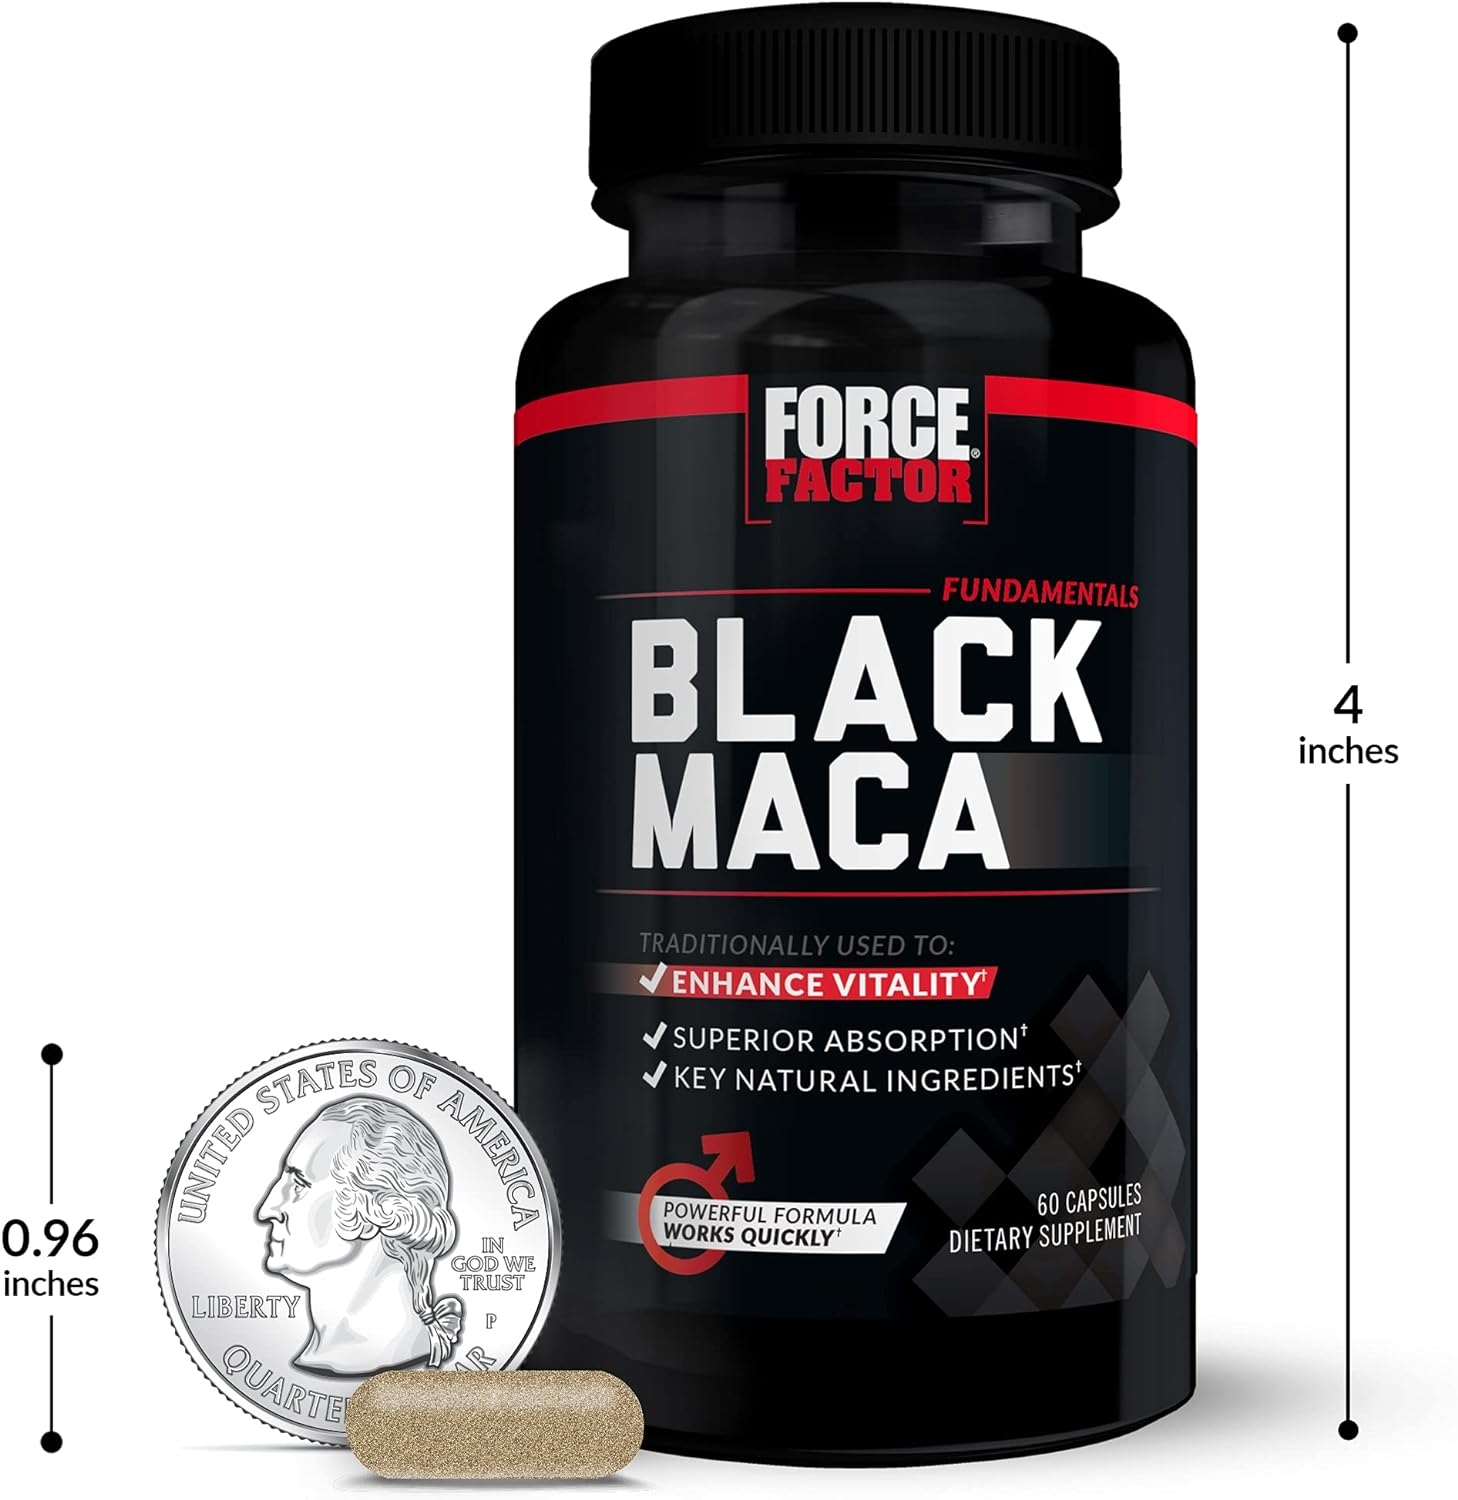 Black Maca Root Vitality Supplement for Men with Superior Absorption and Power, Natural Maca Negra Extract, Fundamentals Series, 1000mg, Force Factor, 120 Capsules (2-Pack)